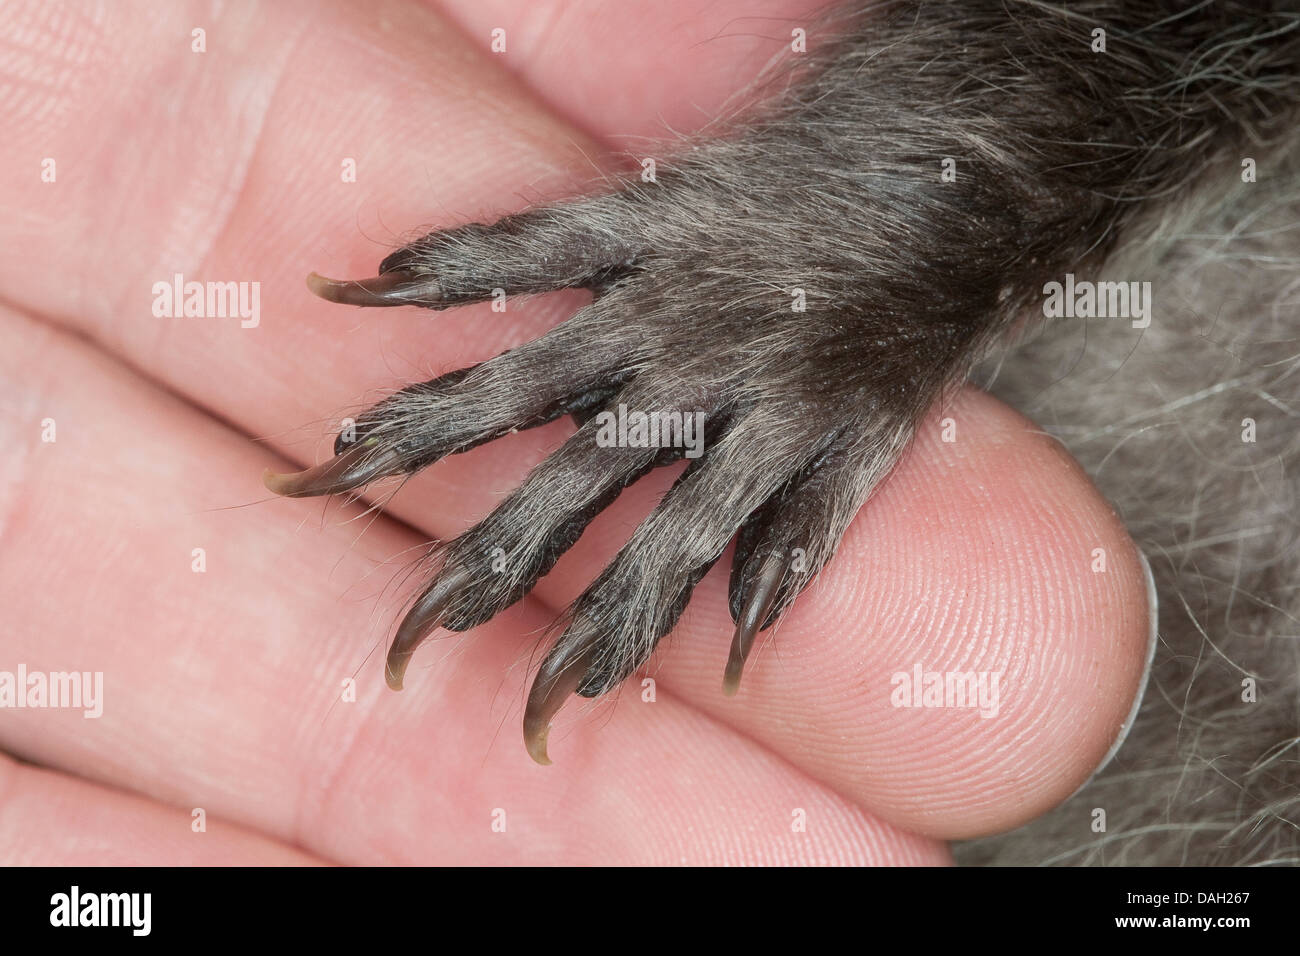 common raccoon (Procyon lotor), paw of an orphaned young animal on a hand of a human being, Germany Stock Photo